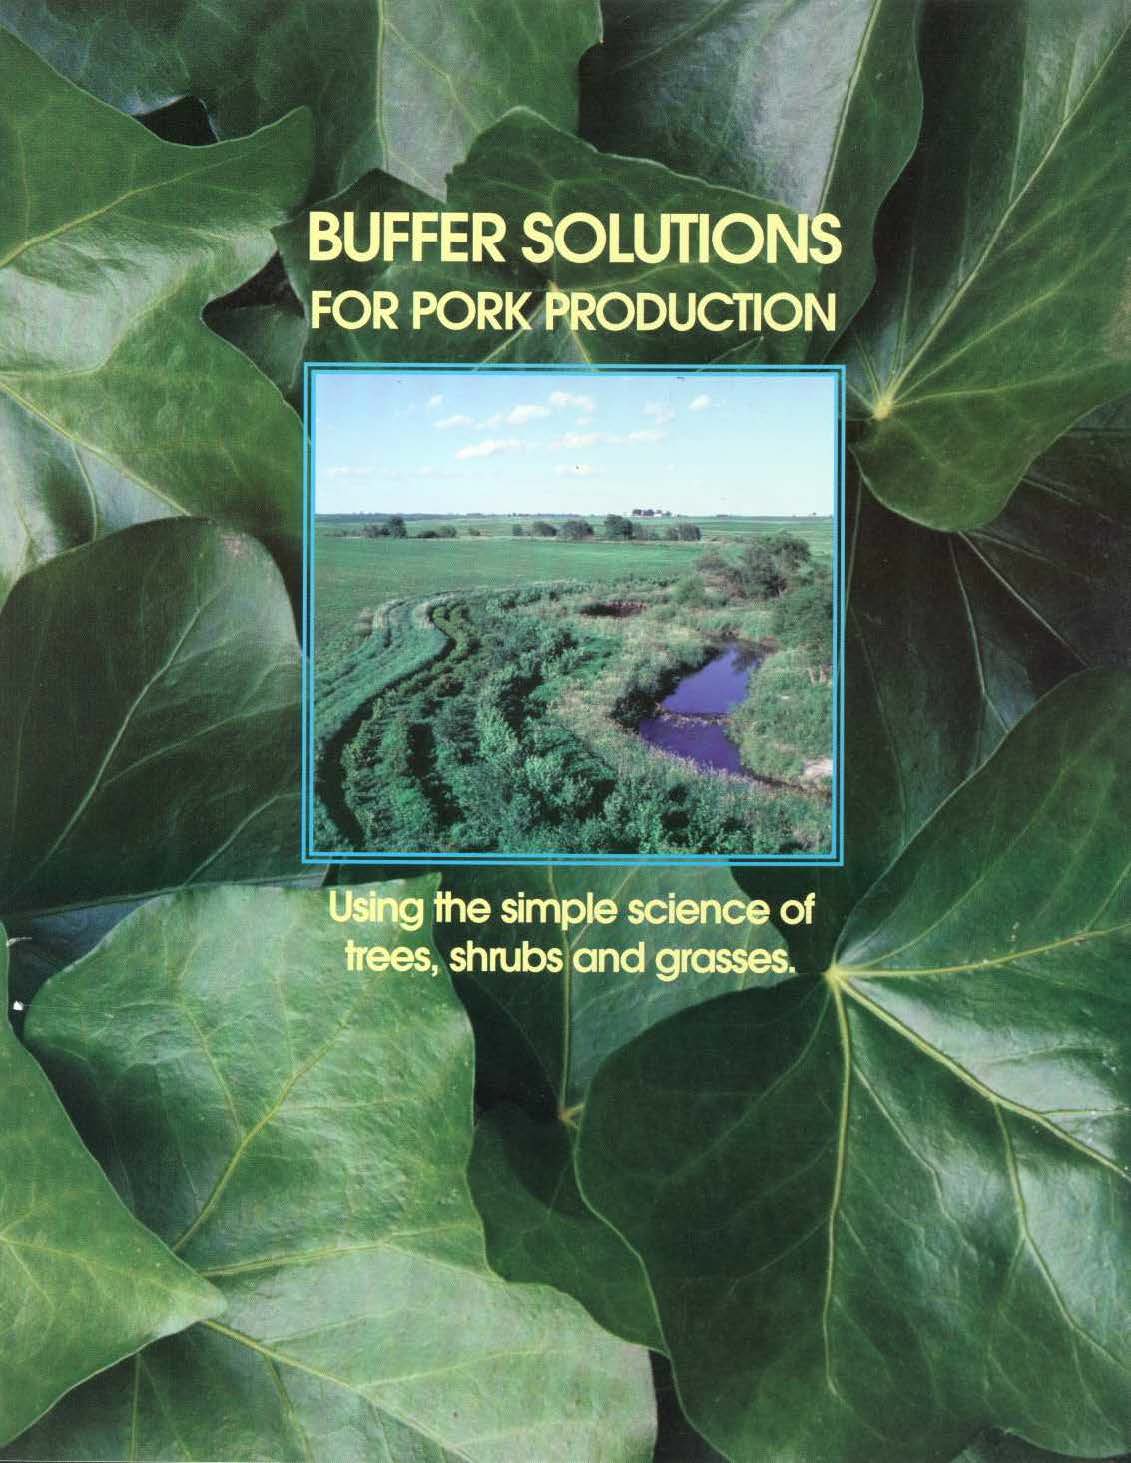 Buffers-Buffer Solutions for Pork Production